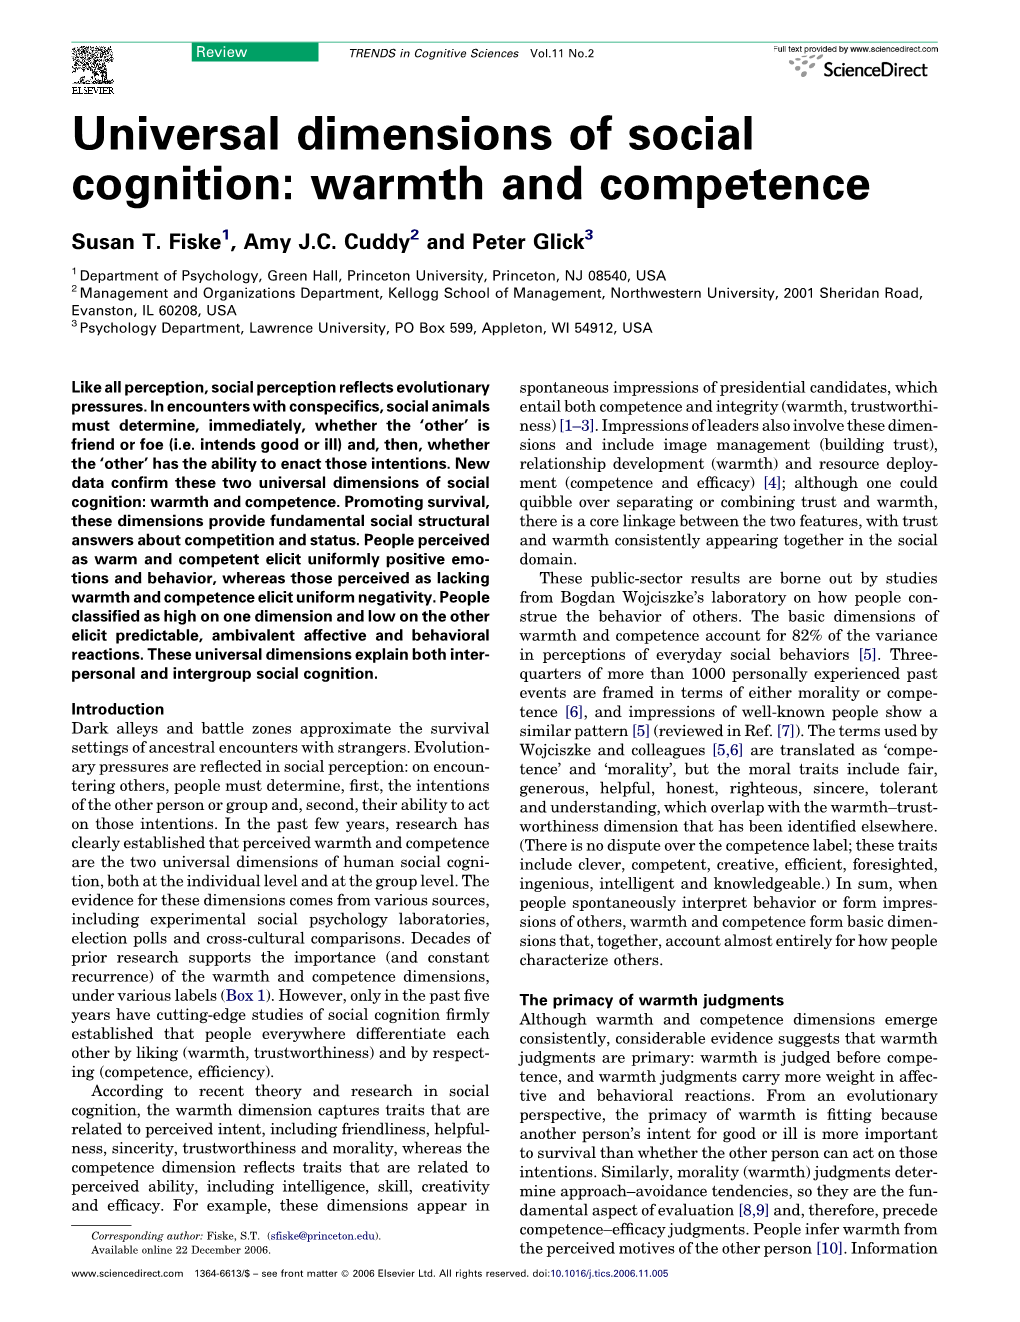 Universal Dimensions of Social Cognition: Warmth and Competence